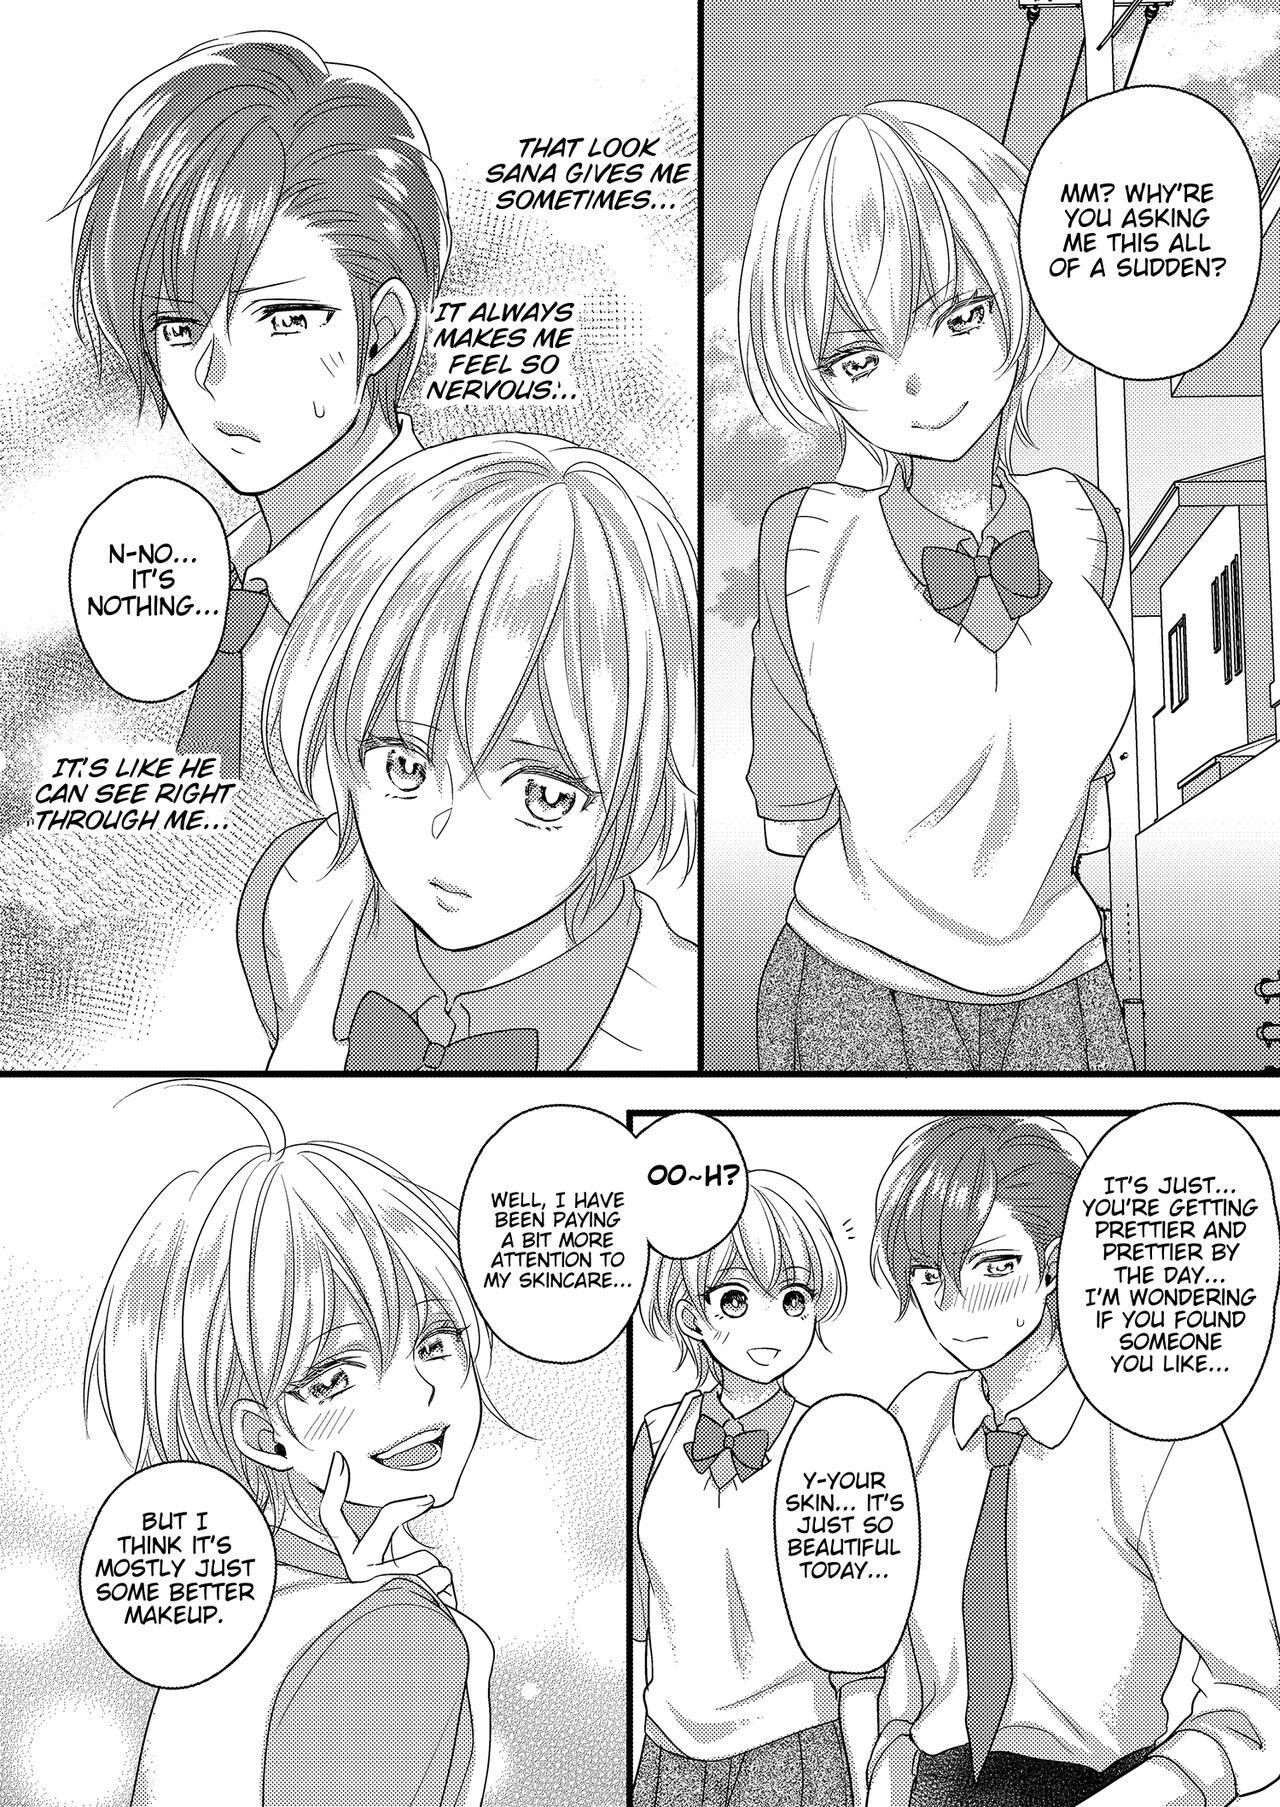 Perverted Haru and Sana ～Love Connected Through Cosplay～ - Original Culo - Page 6